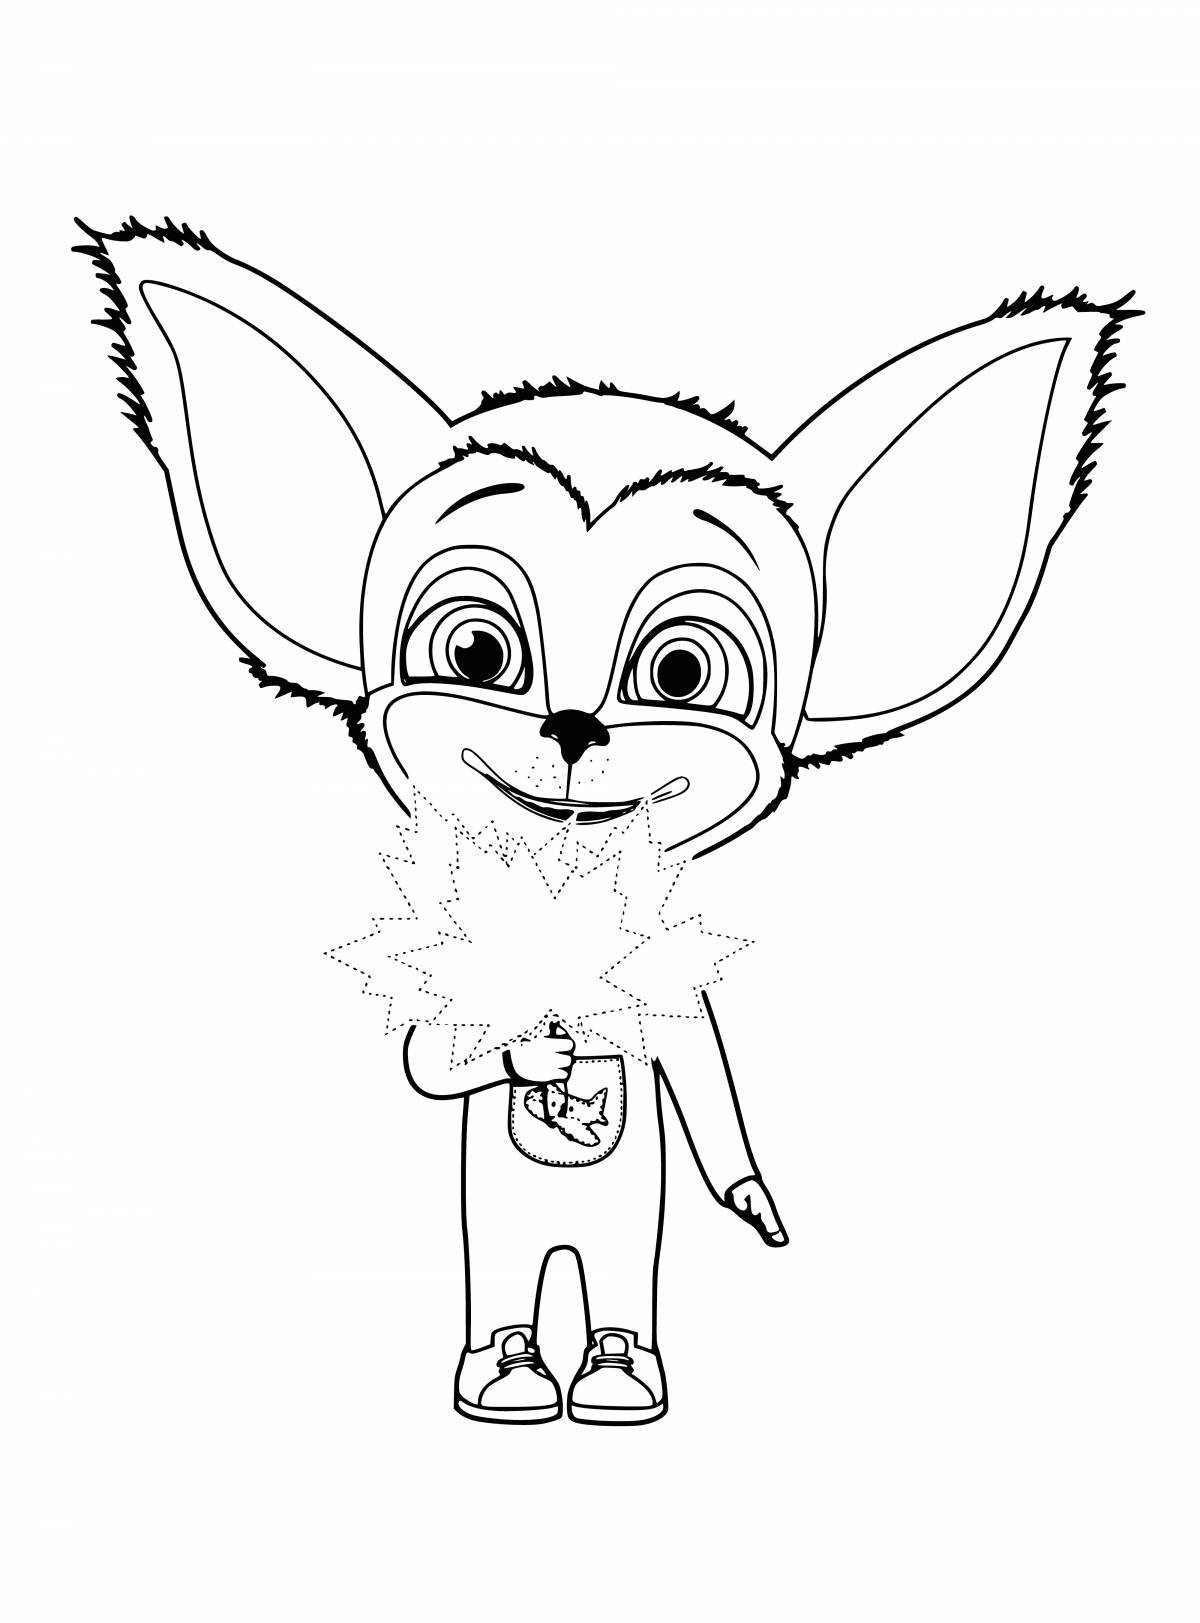 Delightful barboskin coloring pages for kids